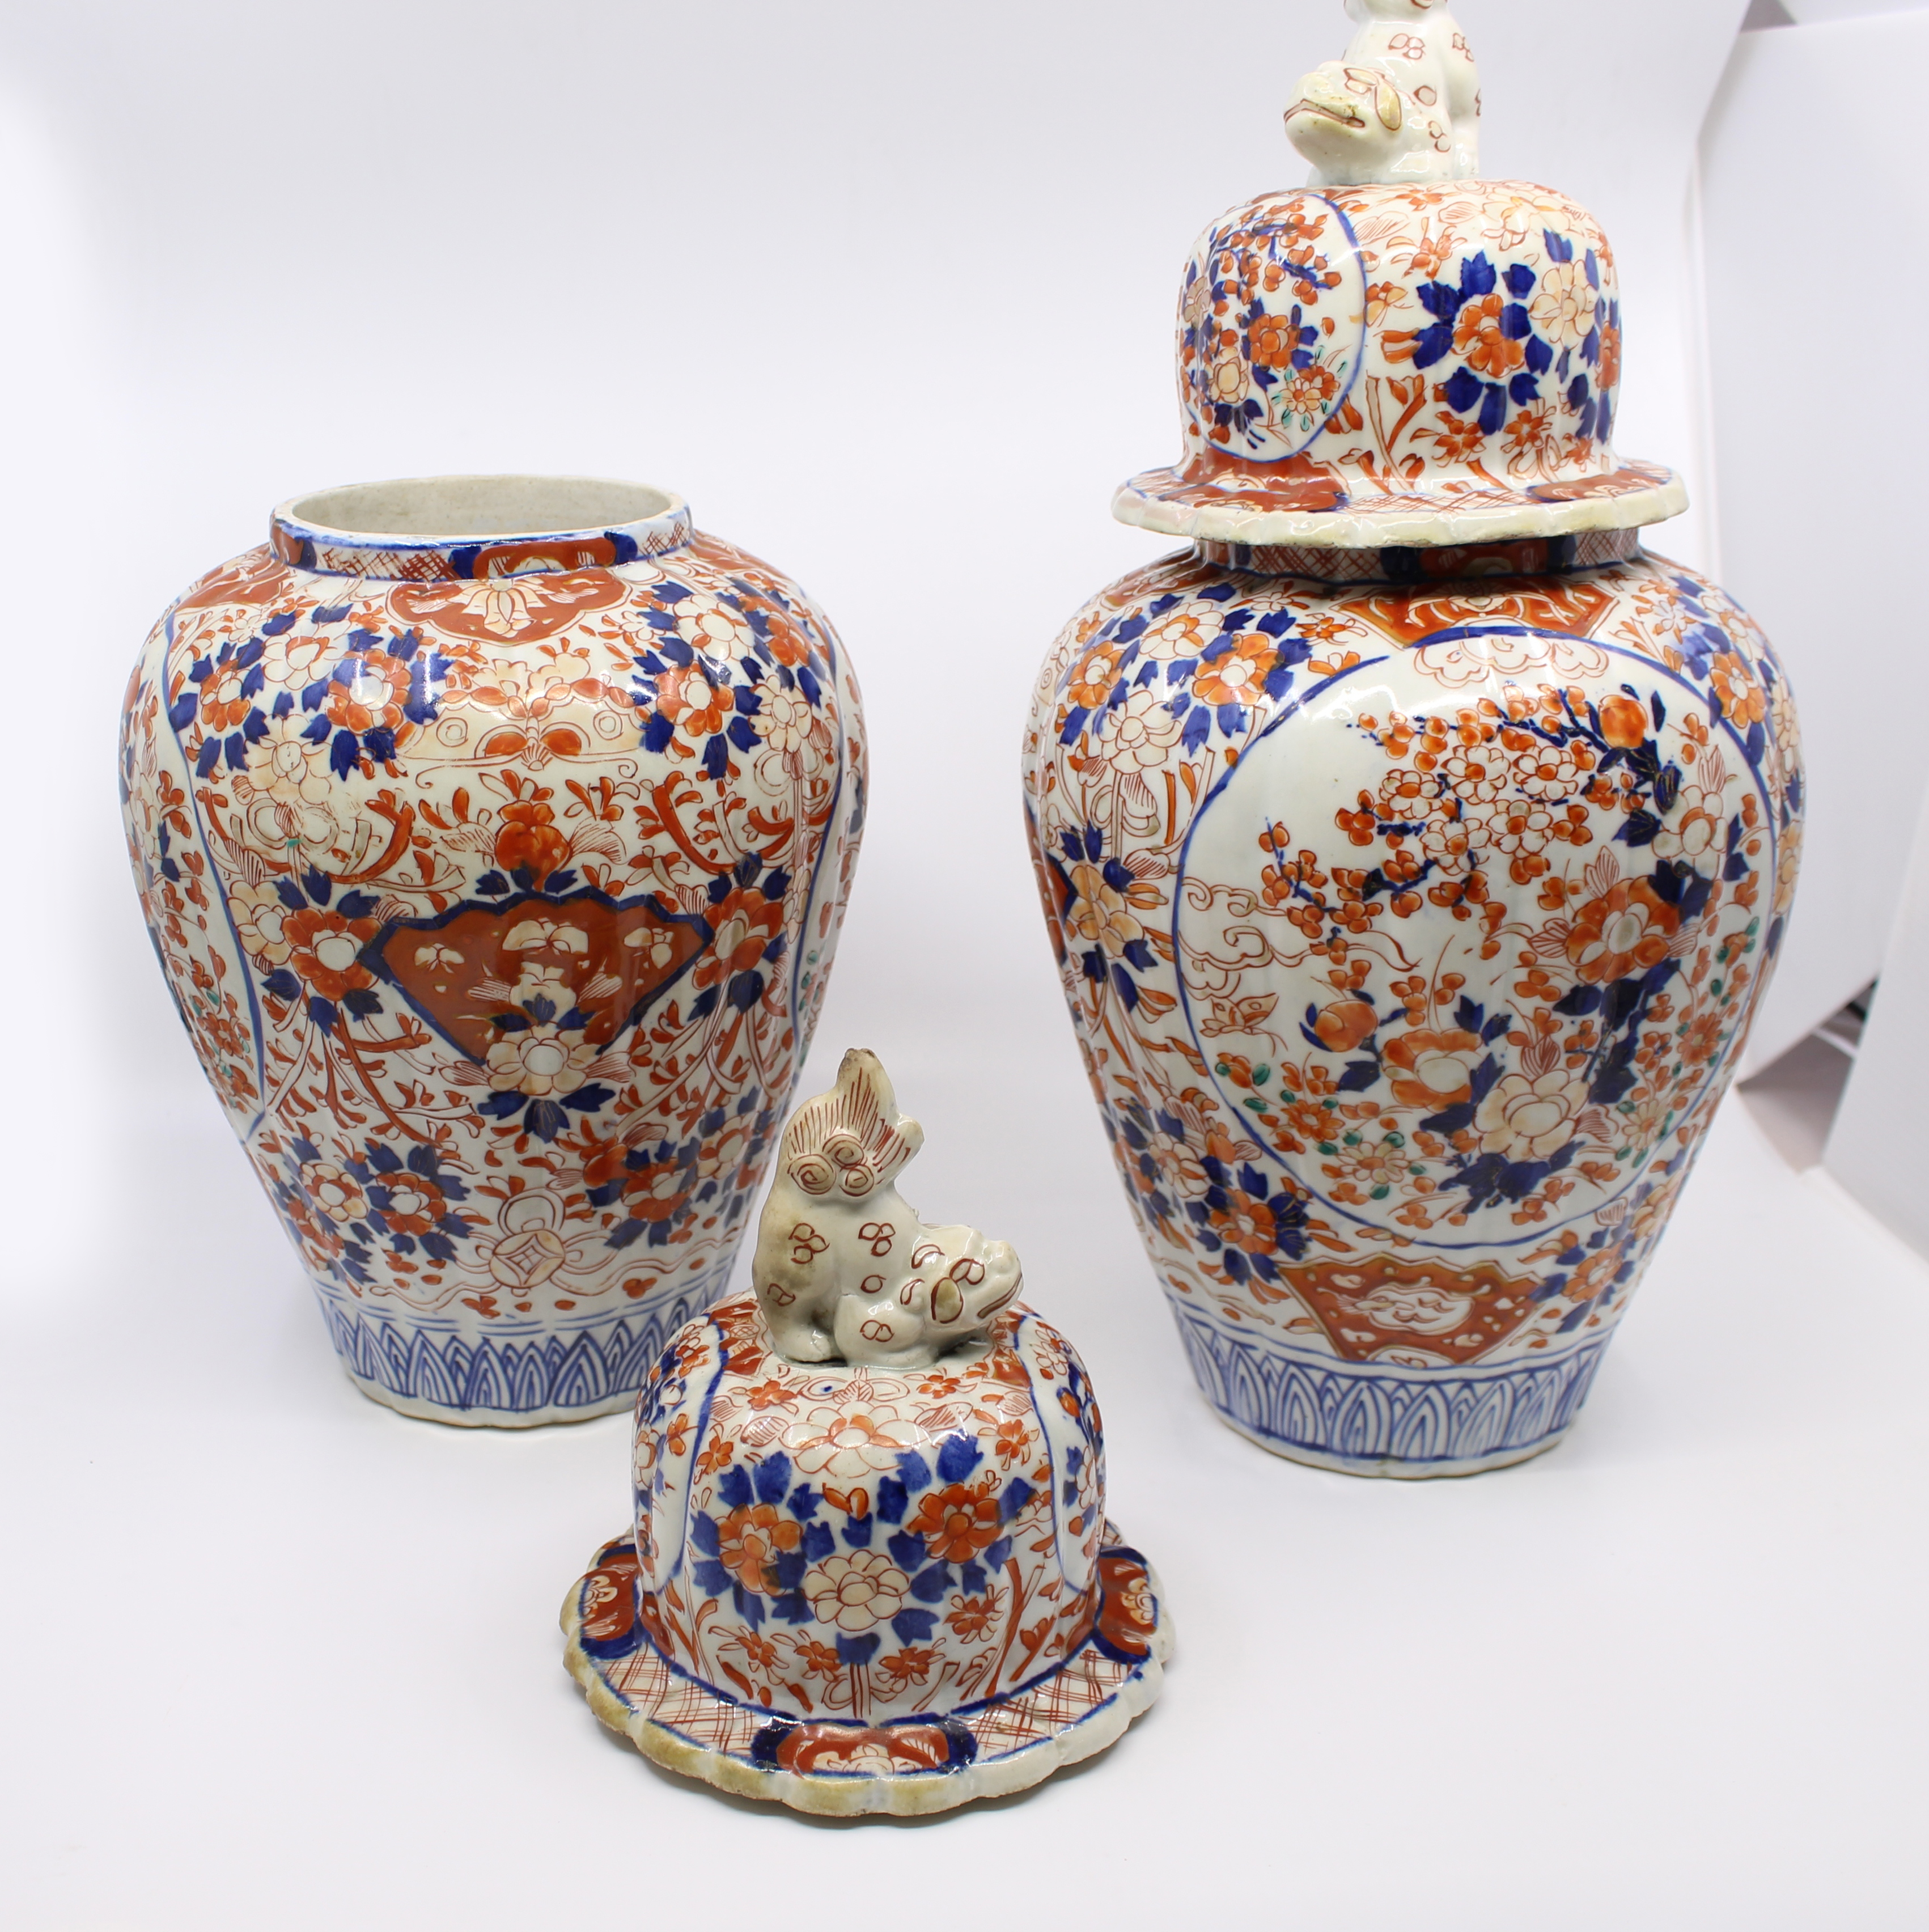 Pair of Antique Chinese Lidded Urns - Image 8 of 10